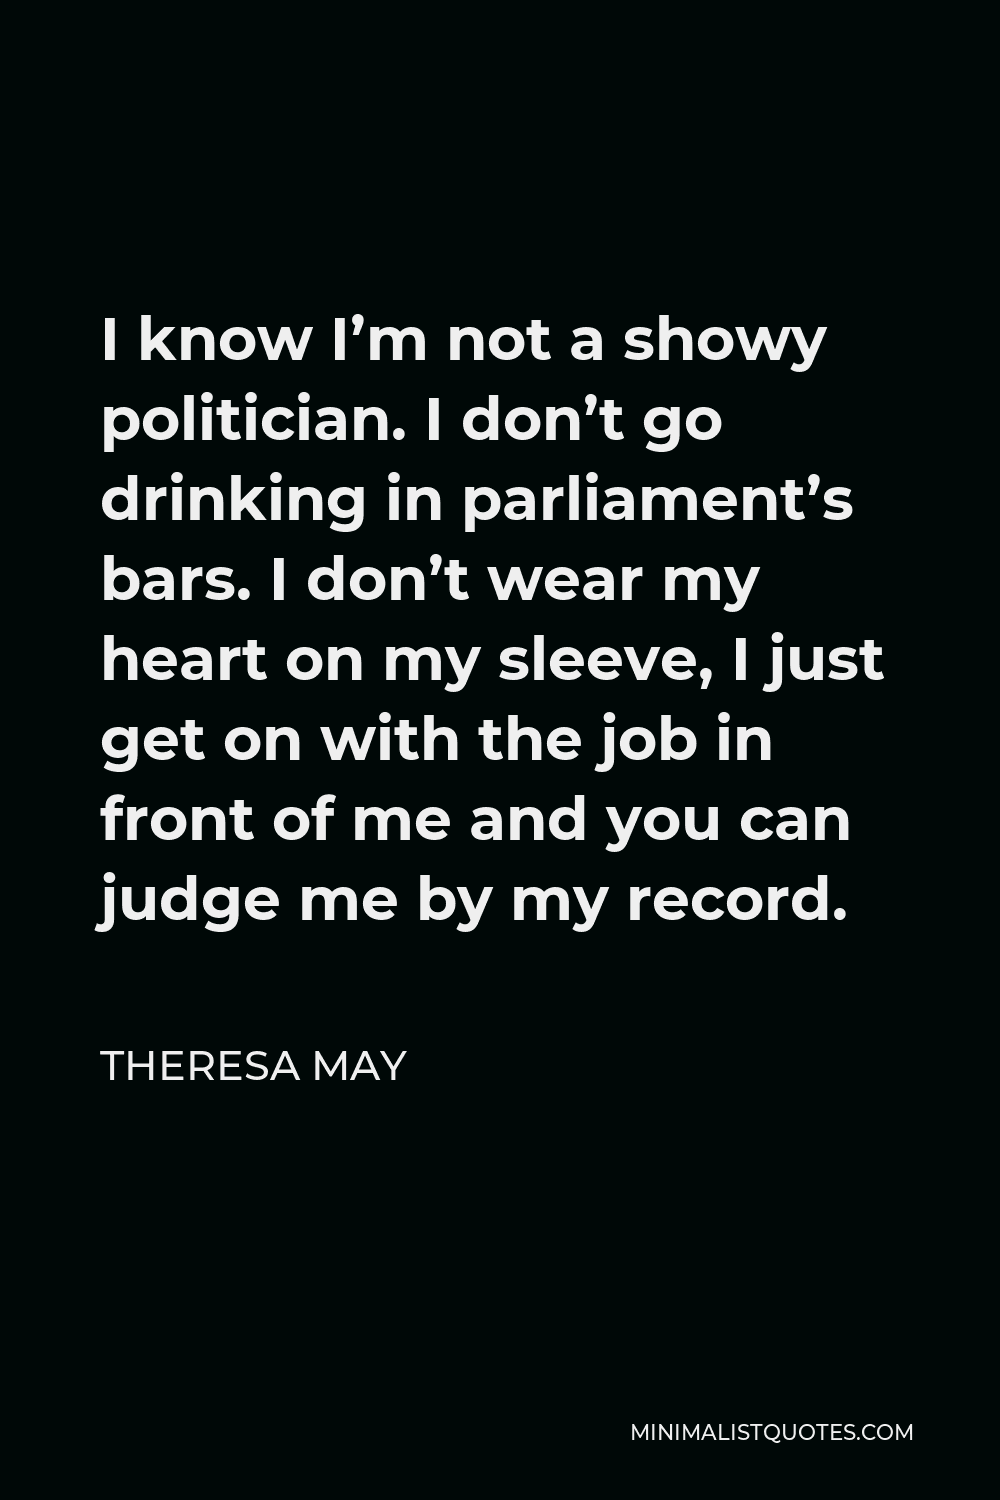 Theresa May Quote - I know I’m not a showy politician. I don’t go drinking in parliament’s bars. I don’t wear my heart on my sleeve, I just get on with the job in front of me and you can judge me by my record.